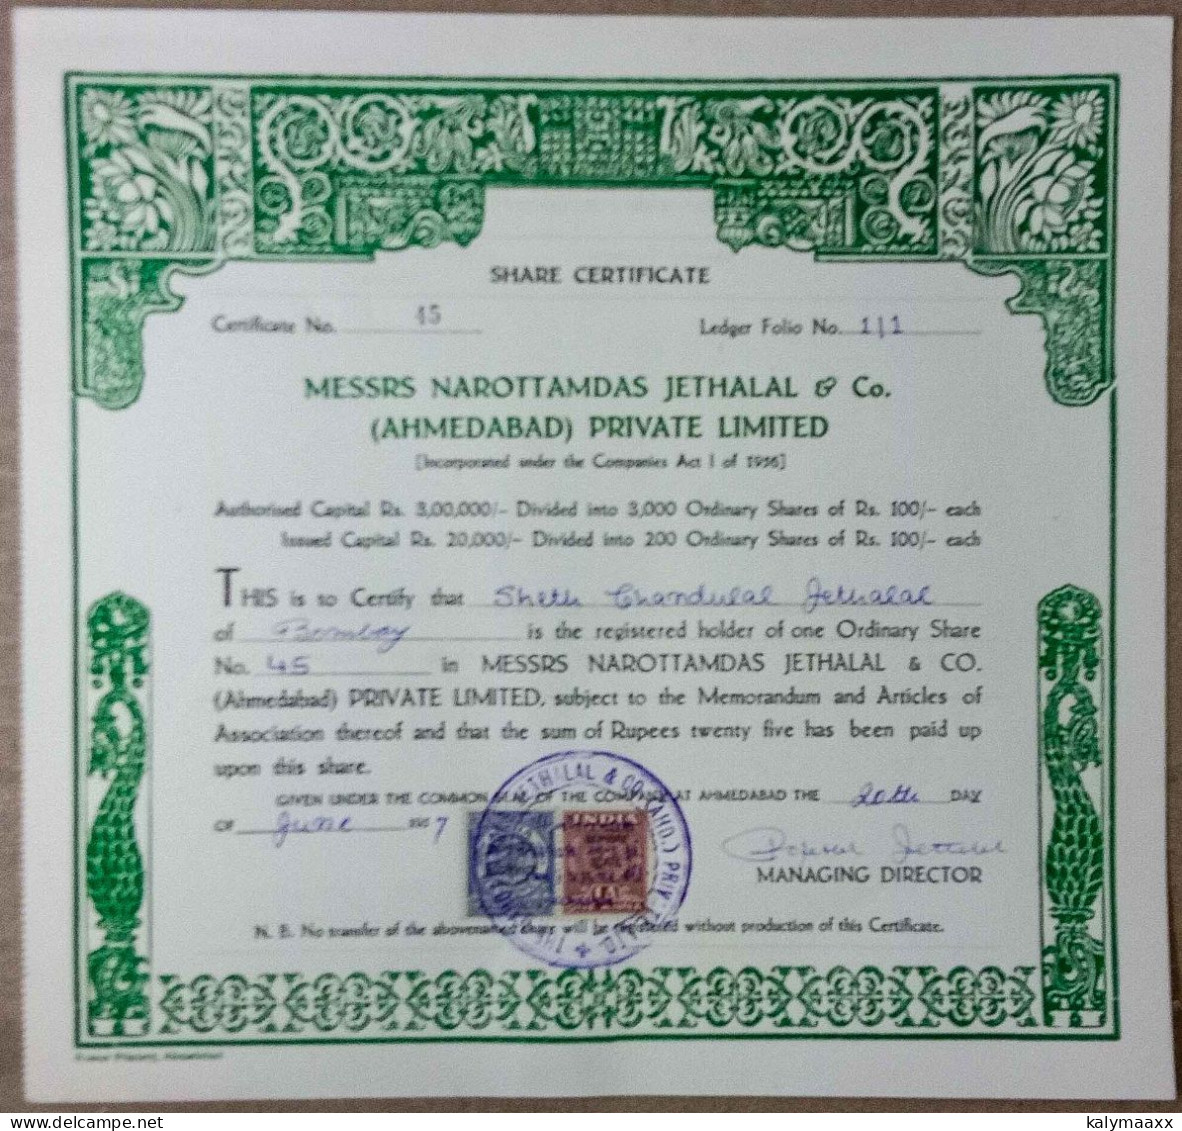 INDIA 1967 MESSRS NAROTTAMDAS JRTHALAL & Co. (AHMEDABAD) PRIVATE LIMITED....SHARE CERTIFICATE - Textiles